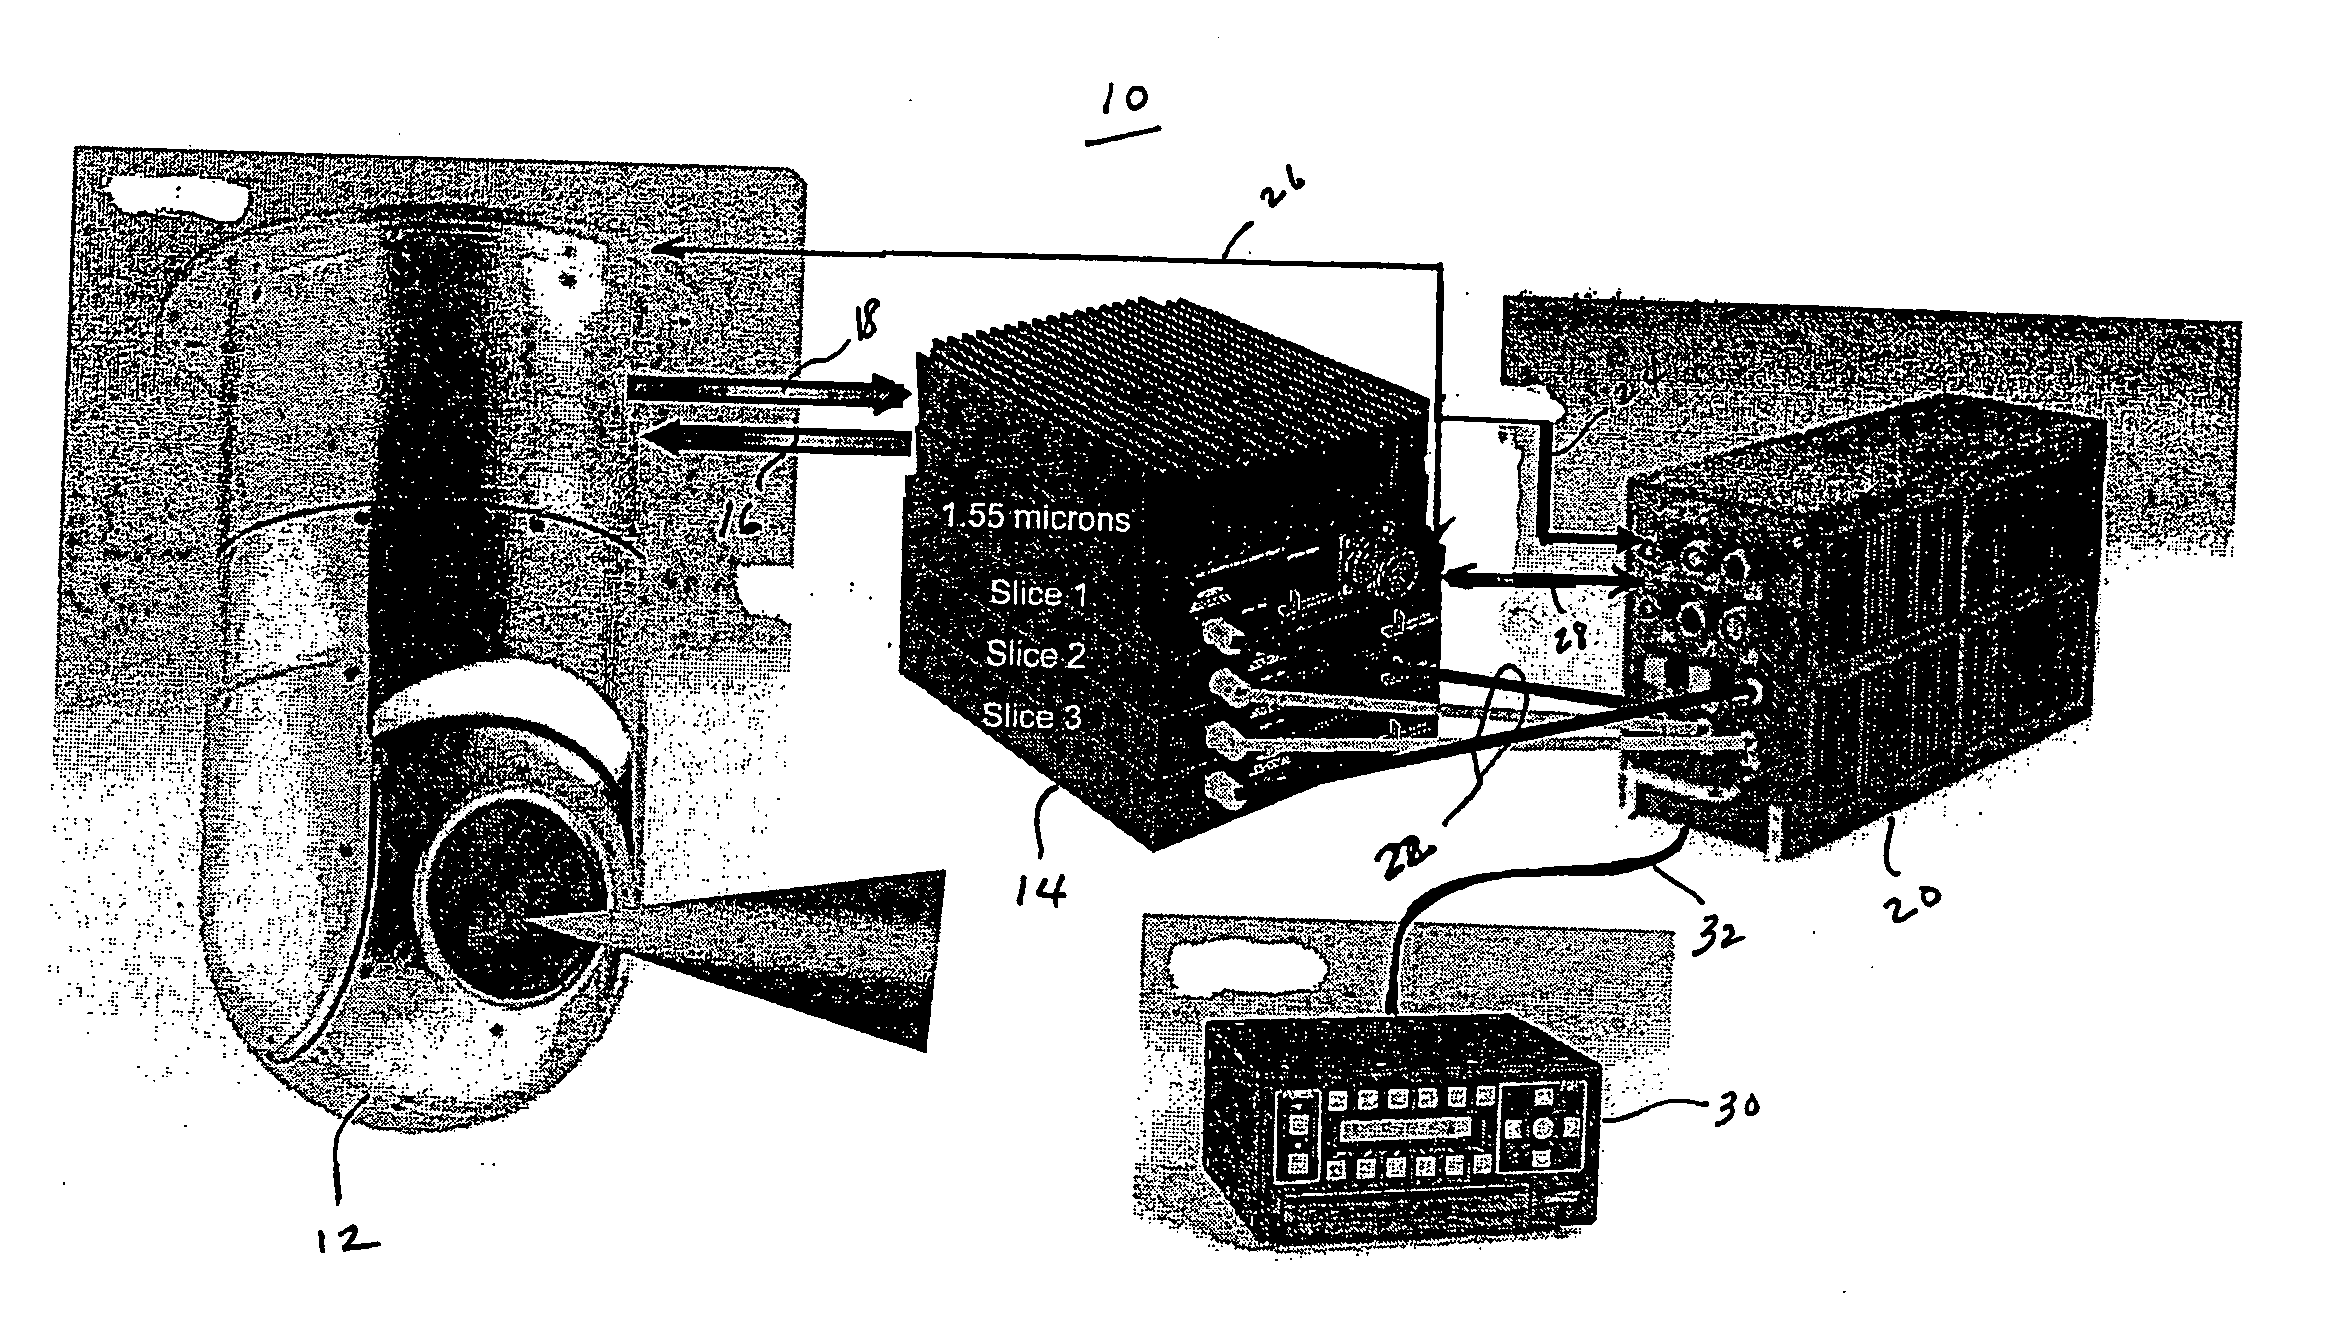 System and method of identifying an object in a laser beam illuminated scene based on material types